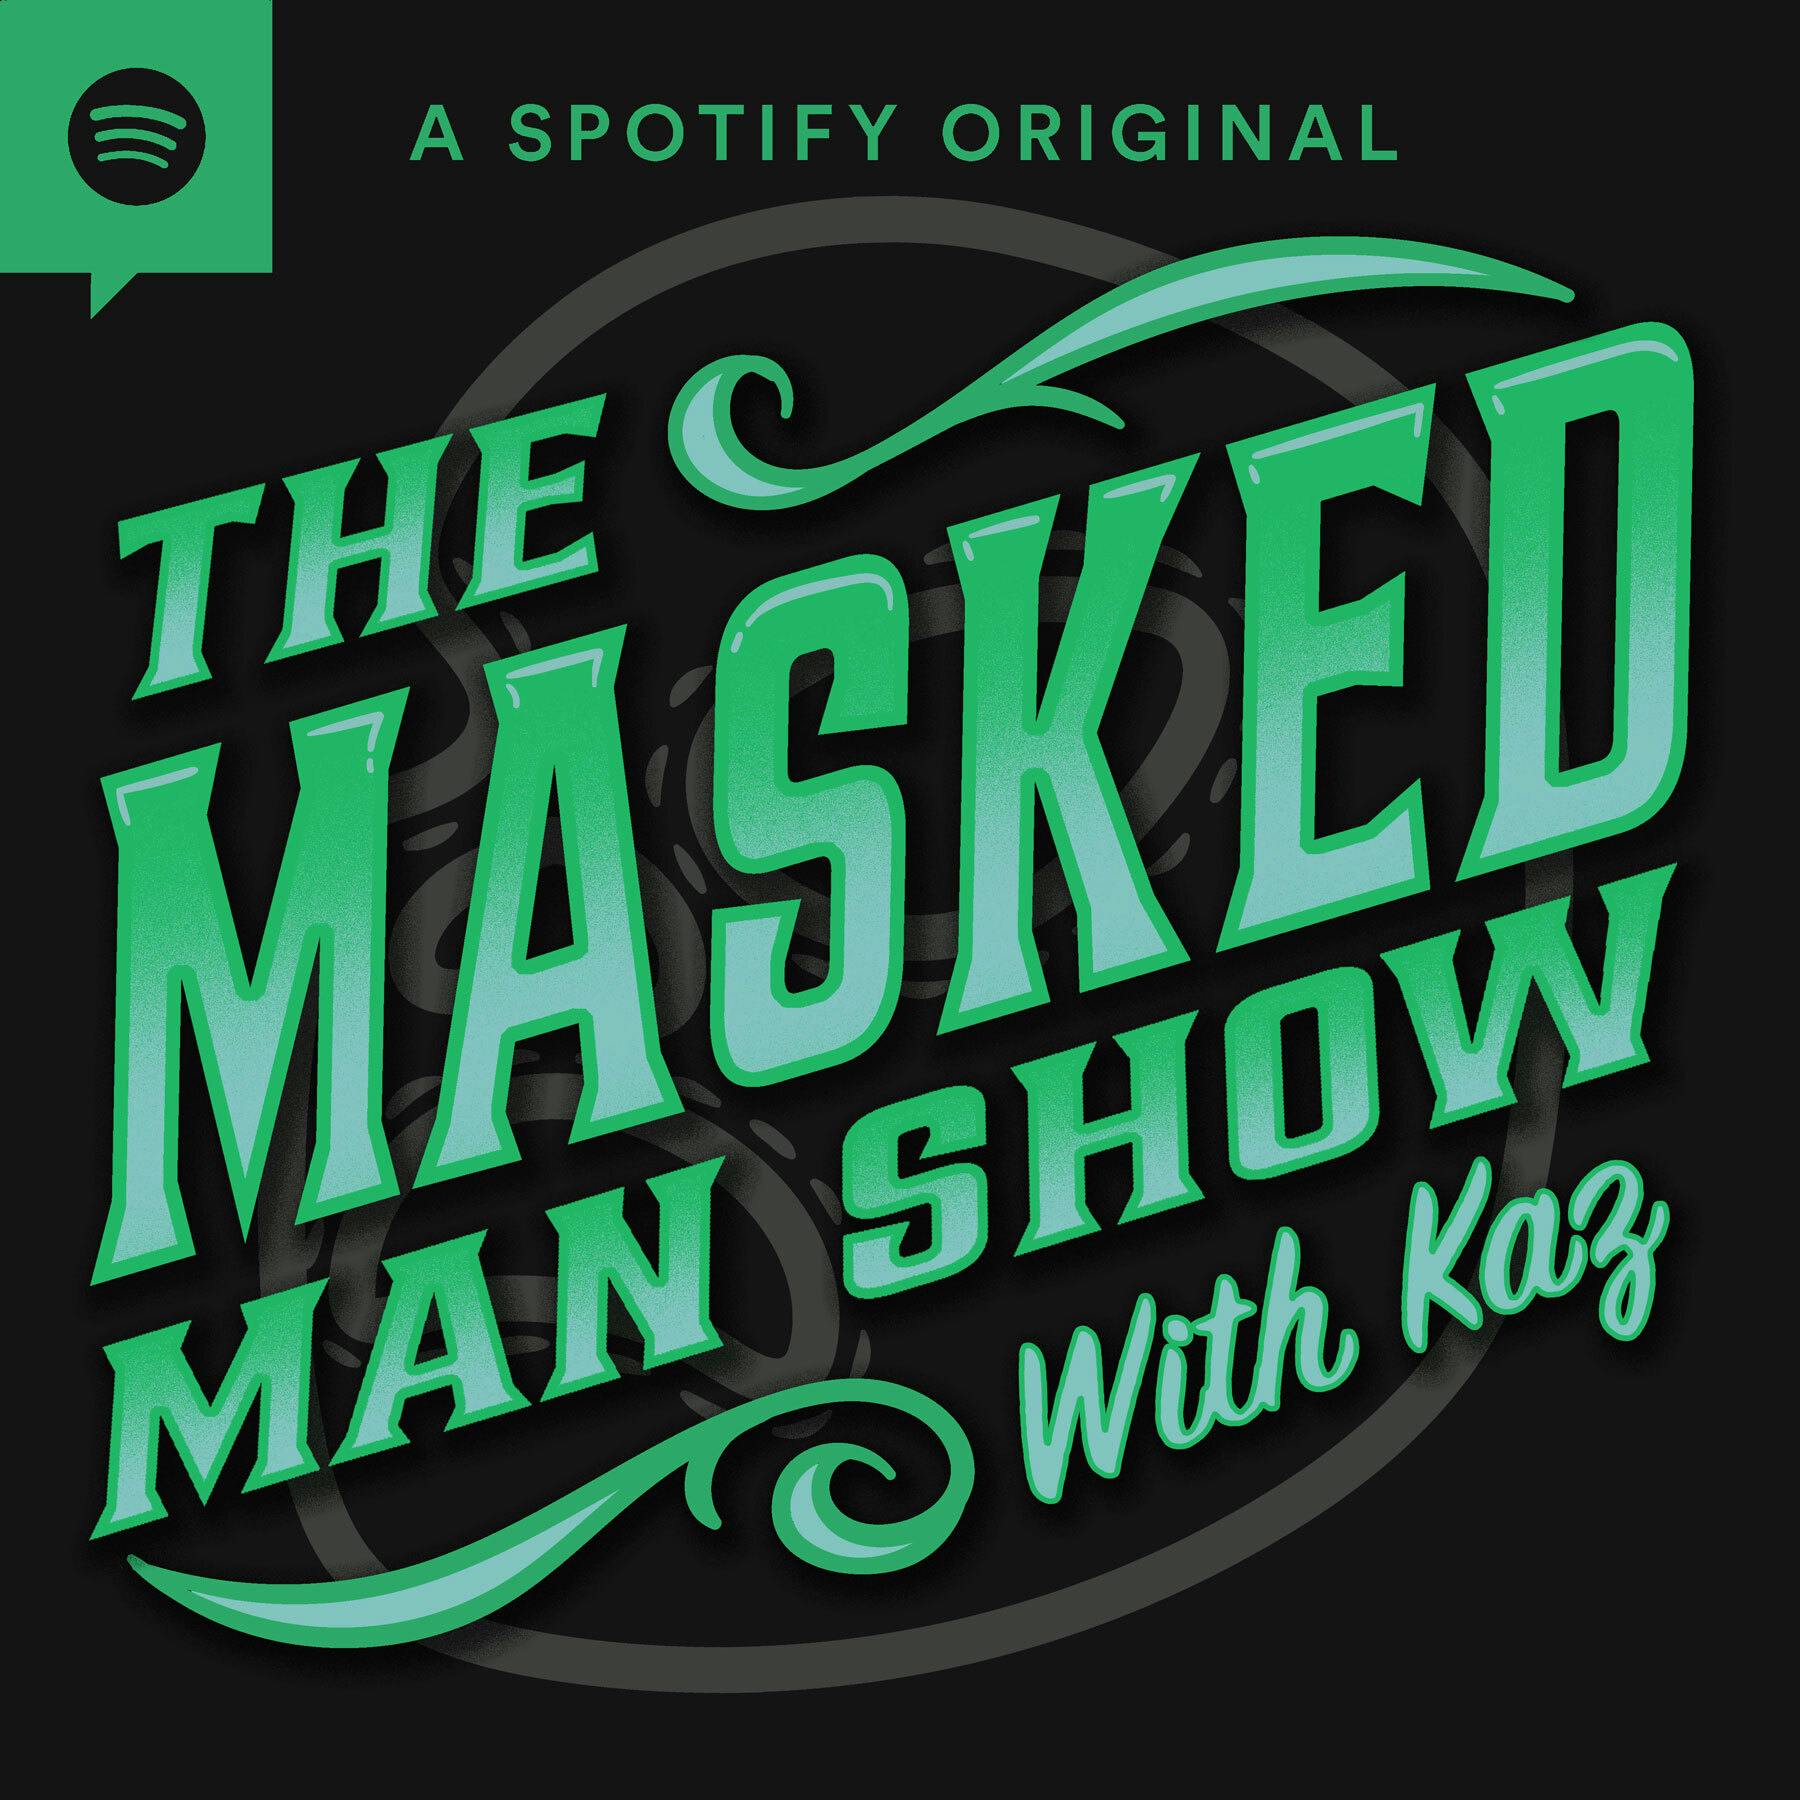 WWE Fastlane Review, Adam Copeland Interview Part II, and a Preview of AEW vs. NXT Tuesday Night | The Masked Man Show